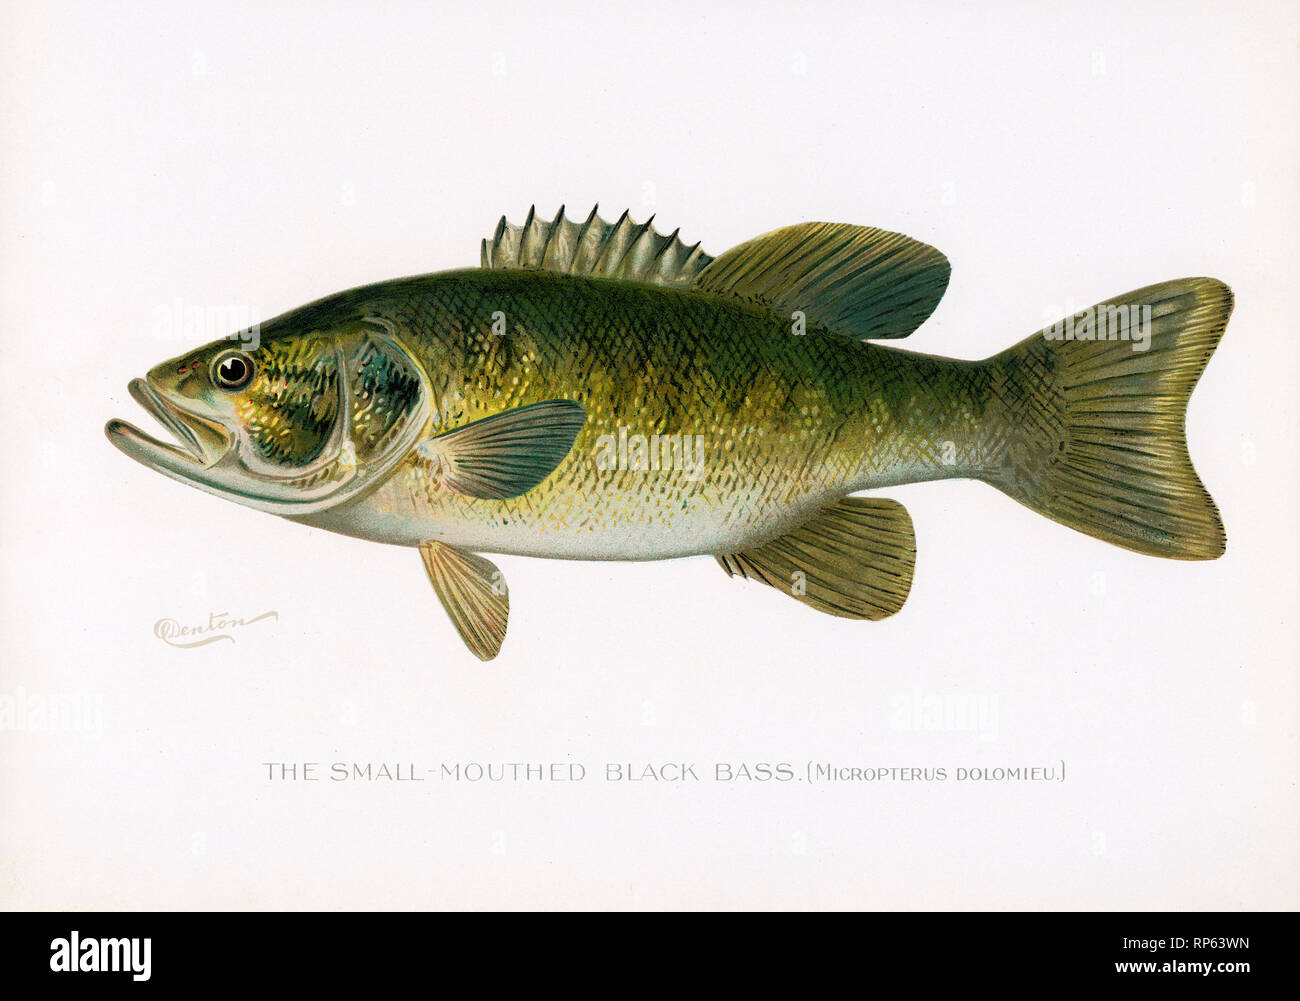 Small Mouthed Black Bass fish by Sherman Denton Stock Photo